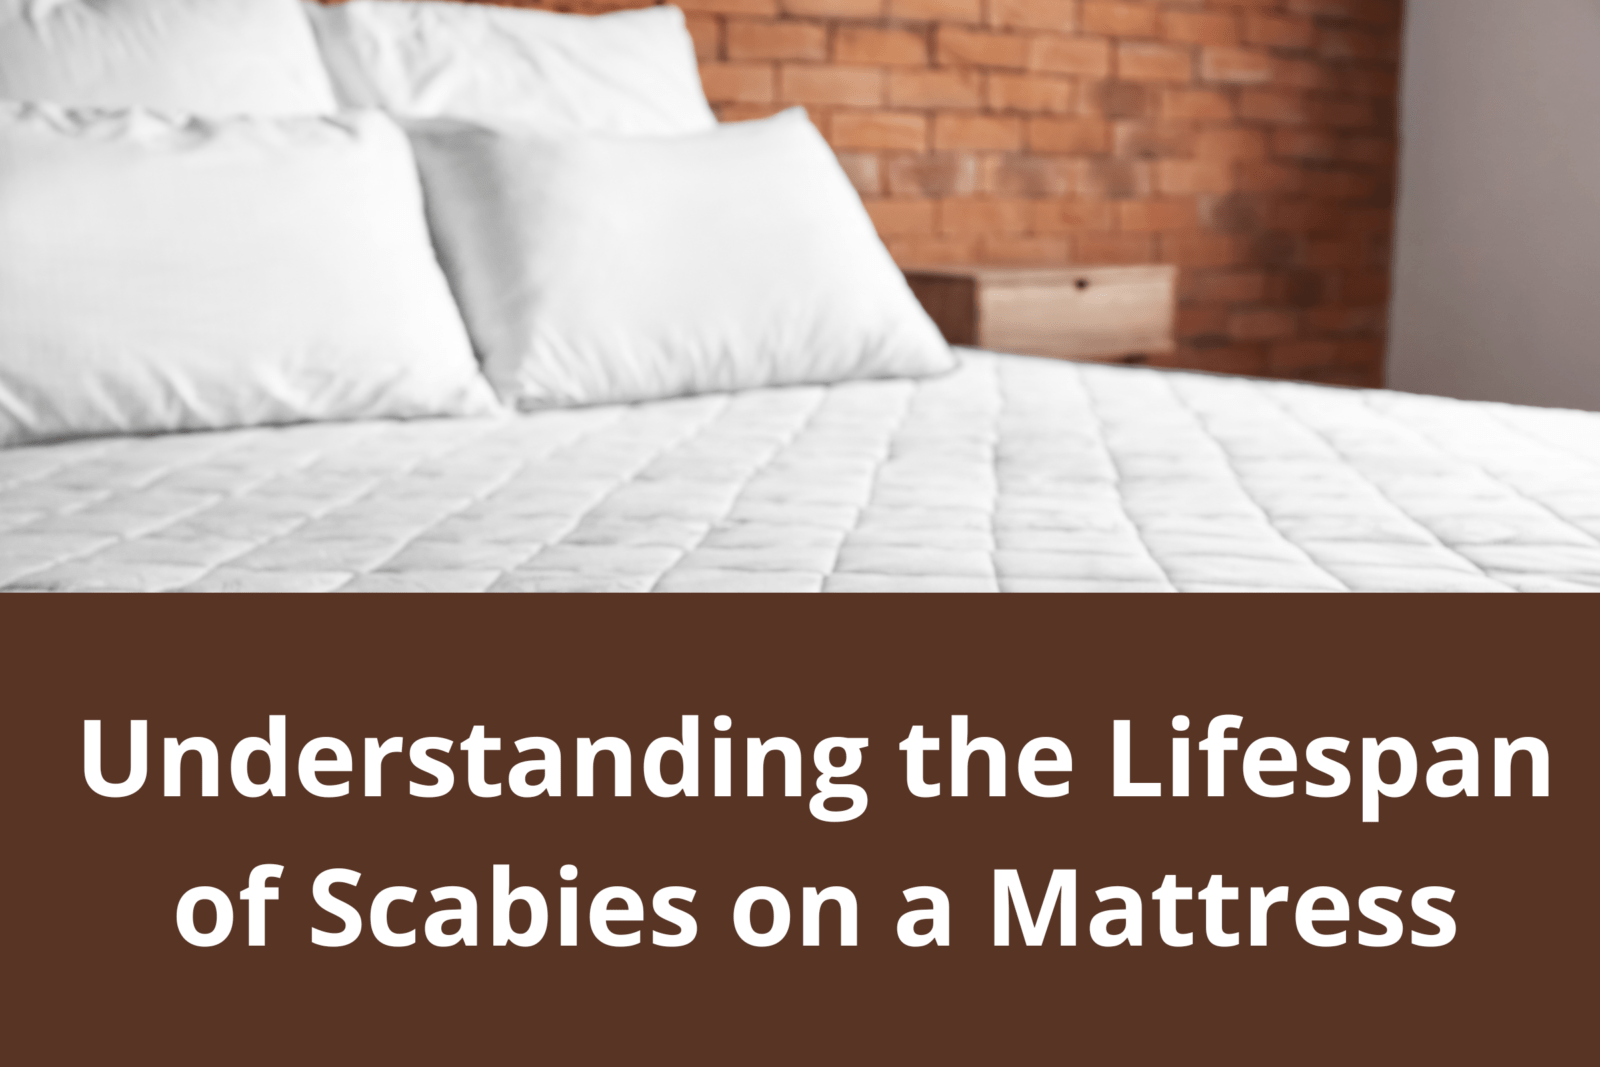 Understanding the Lifespan of Scabies on a Mattress